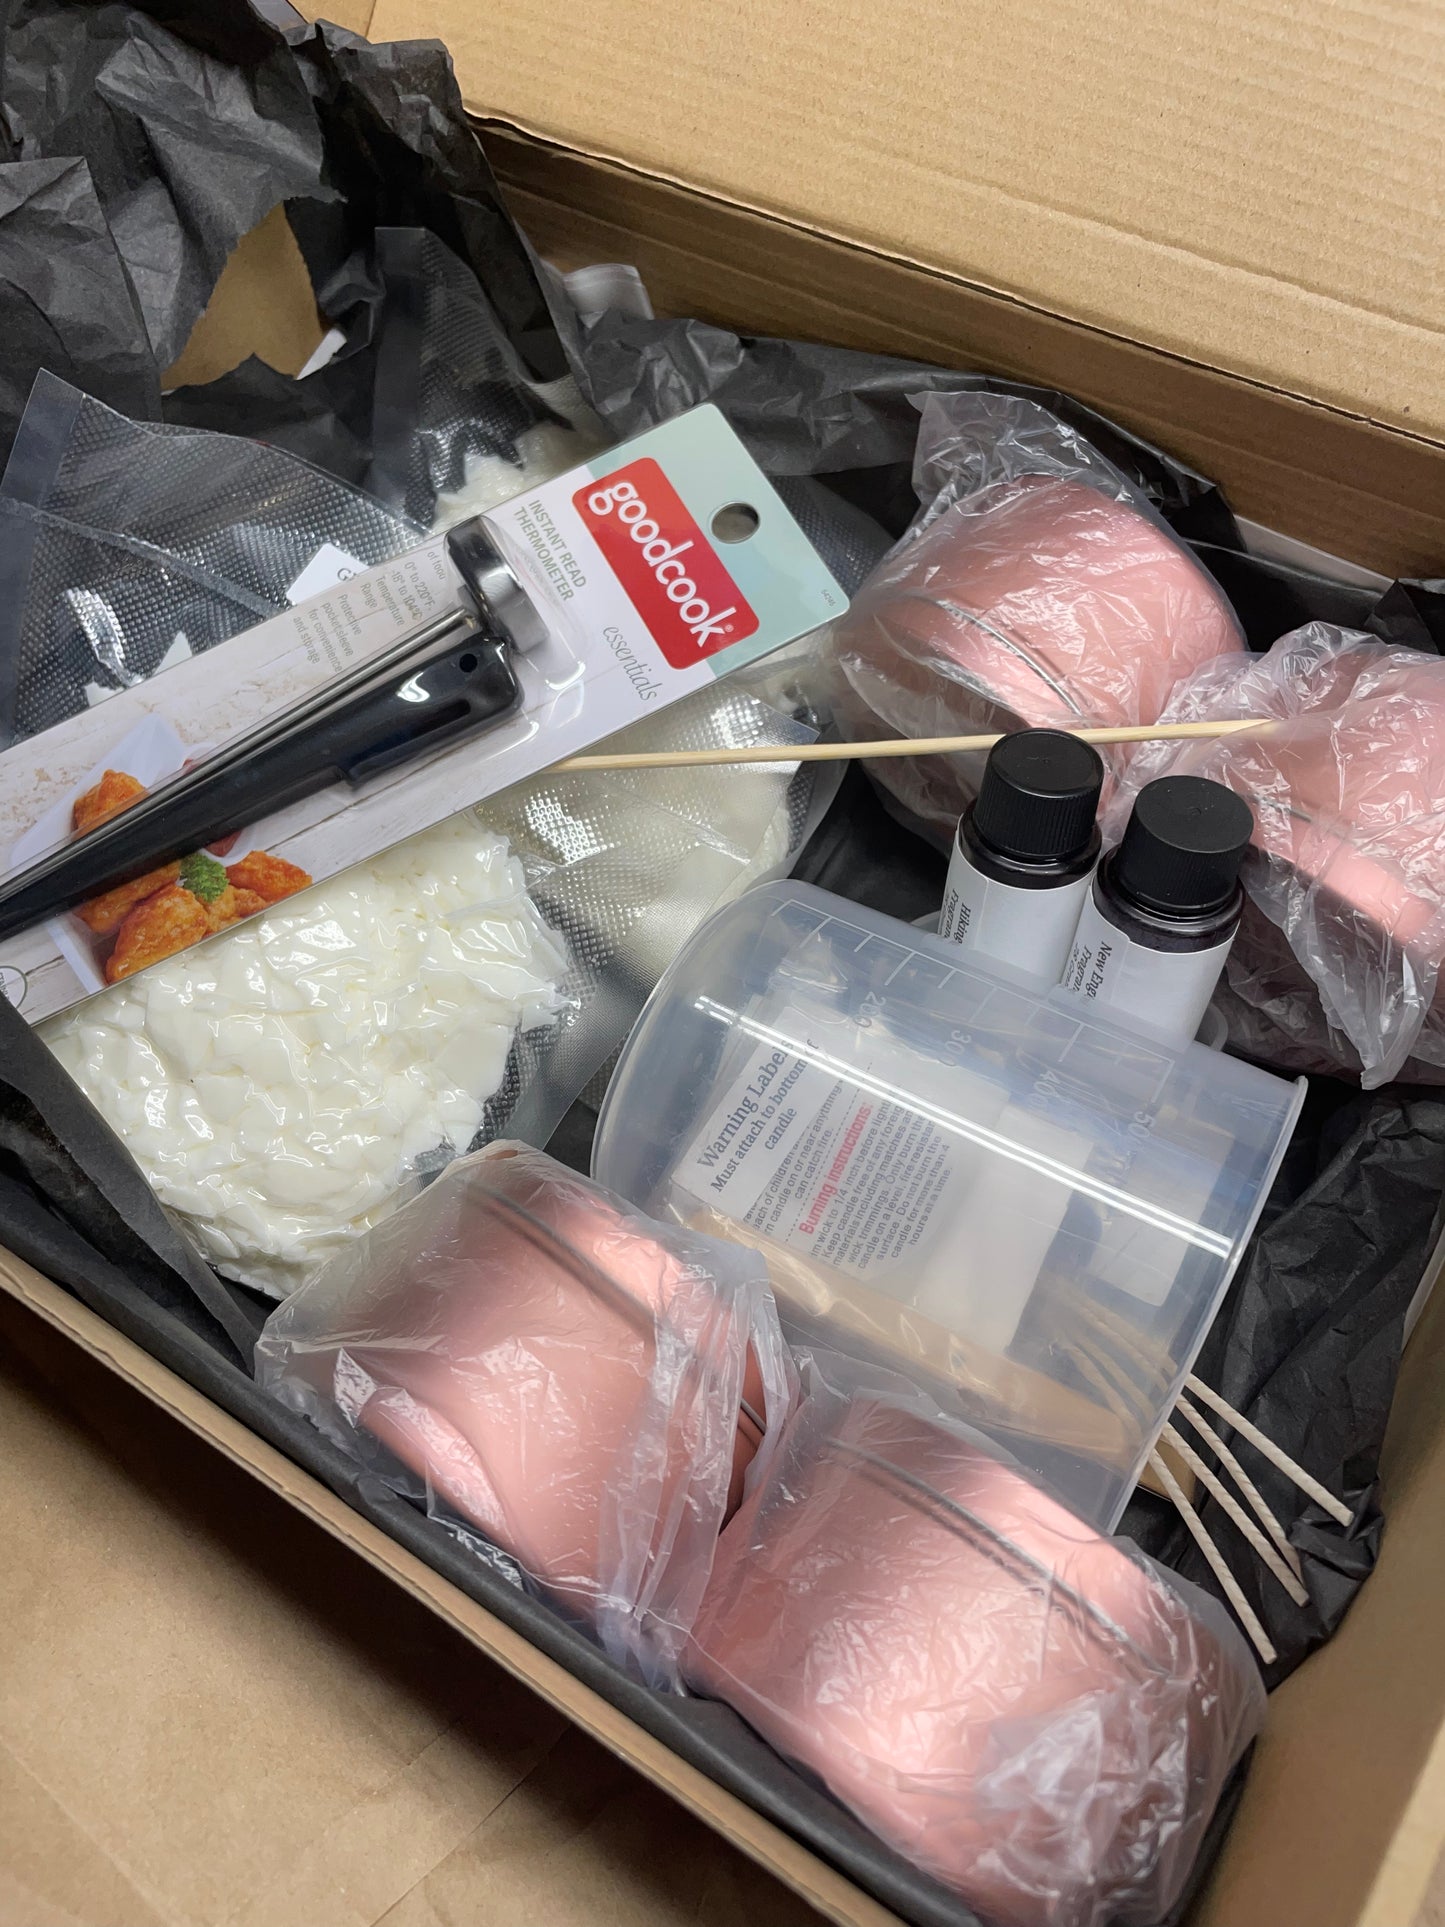 Soy Candle Making Kits